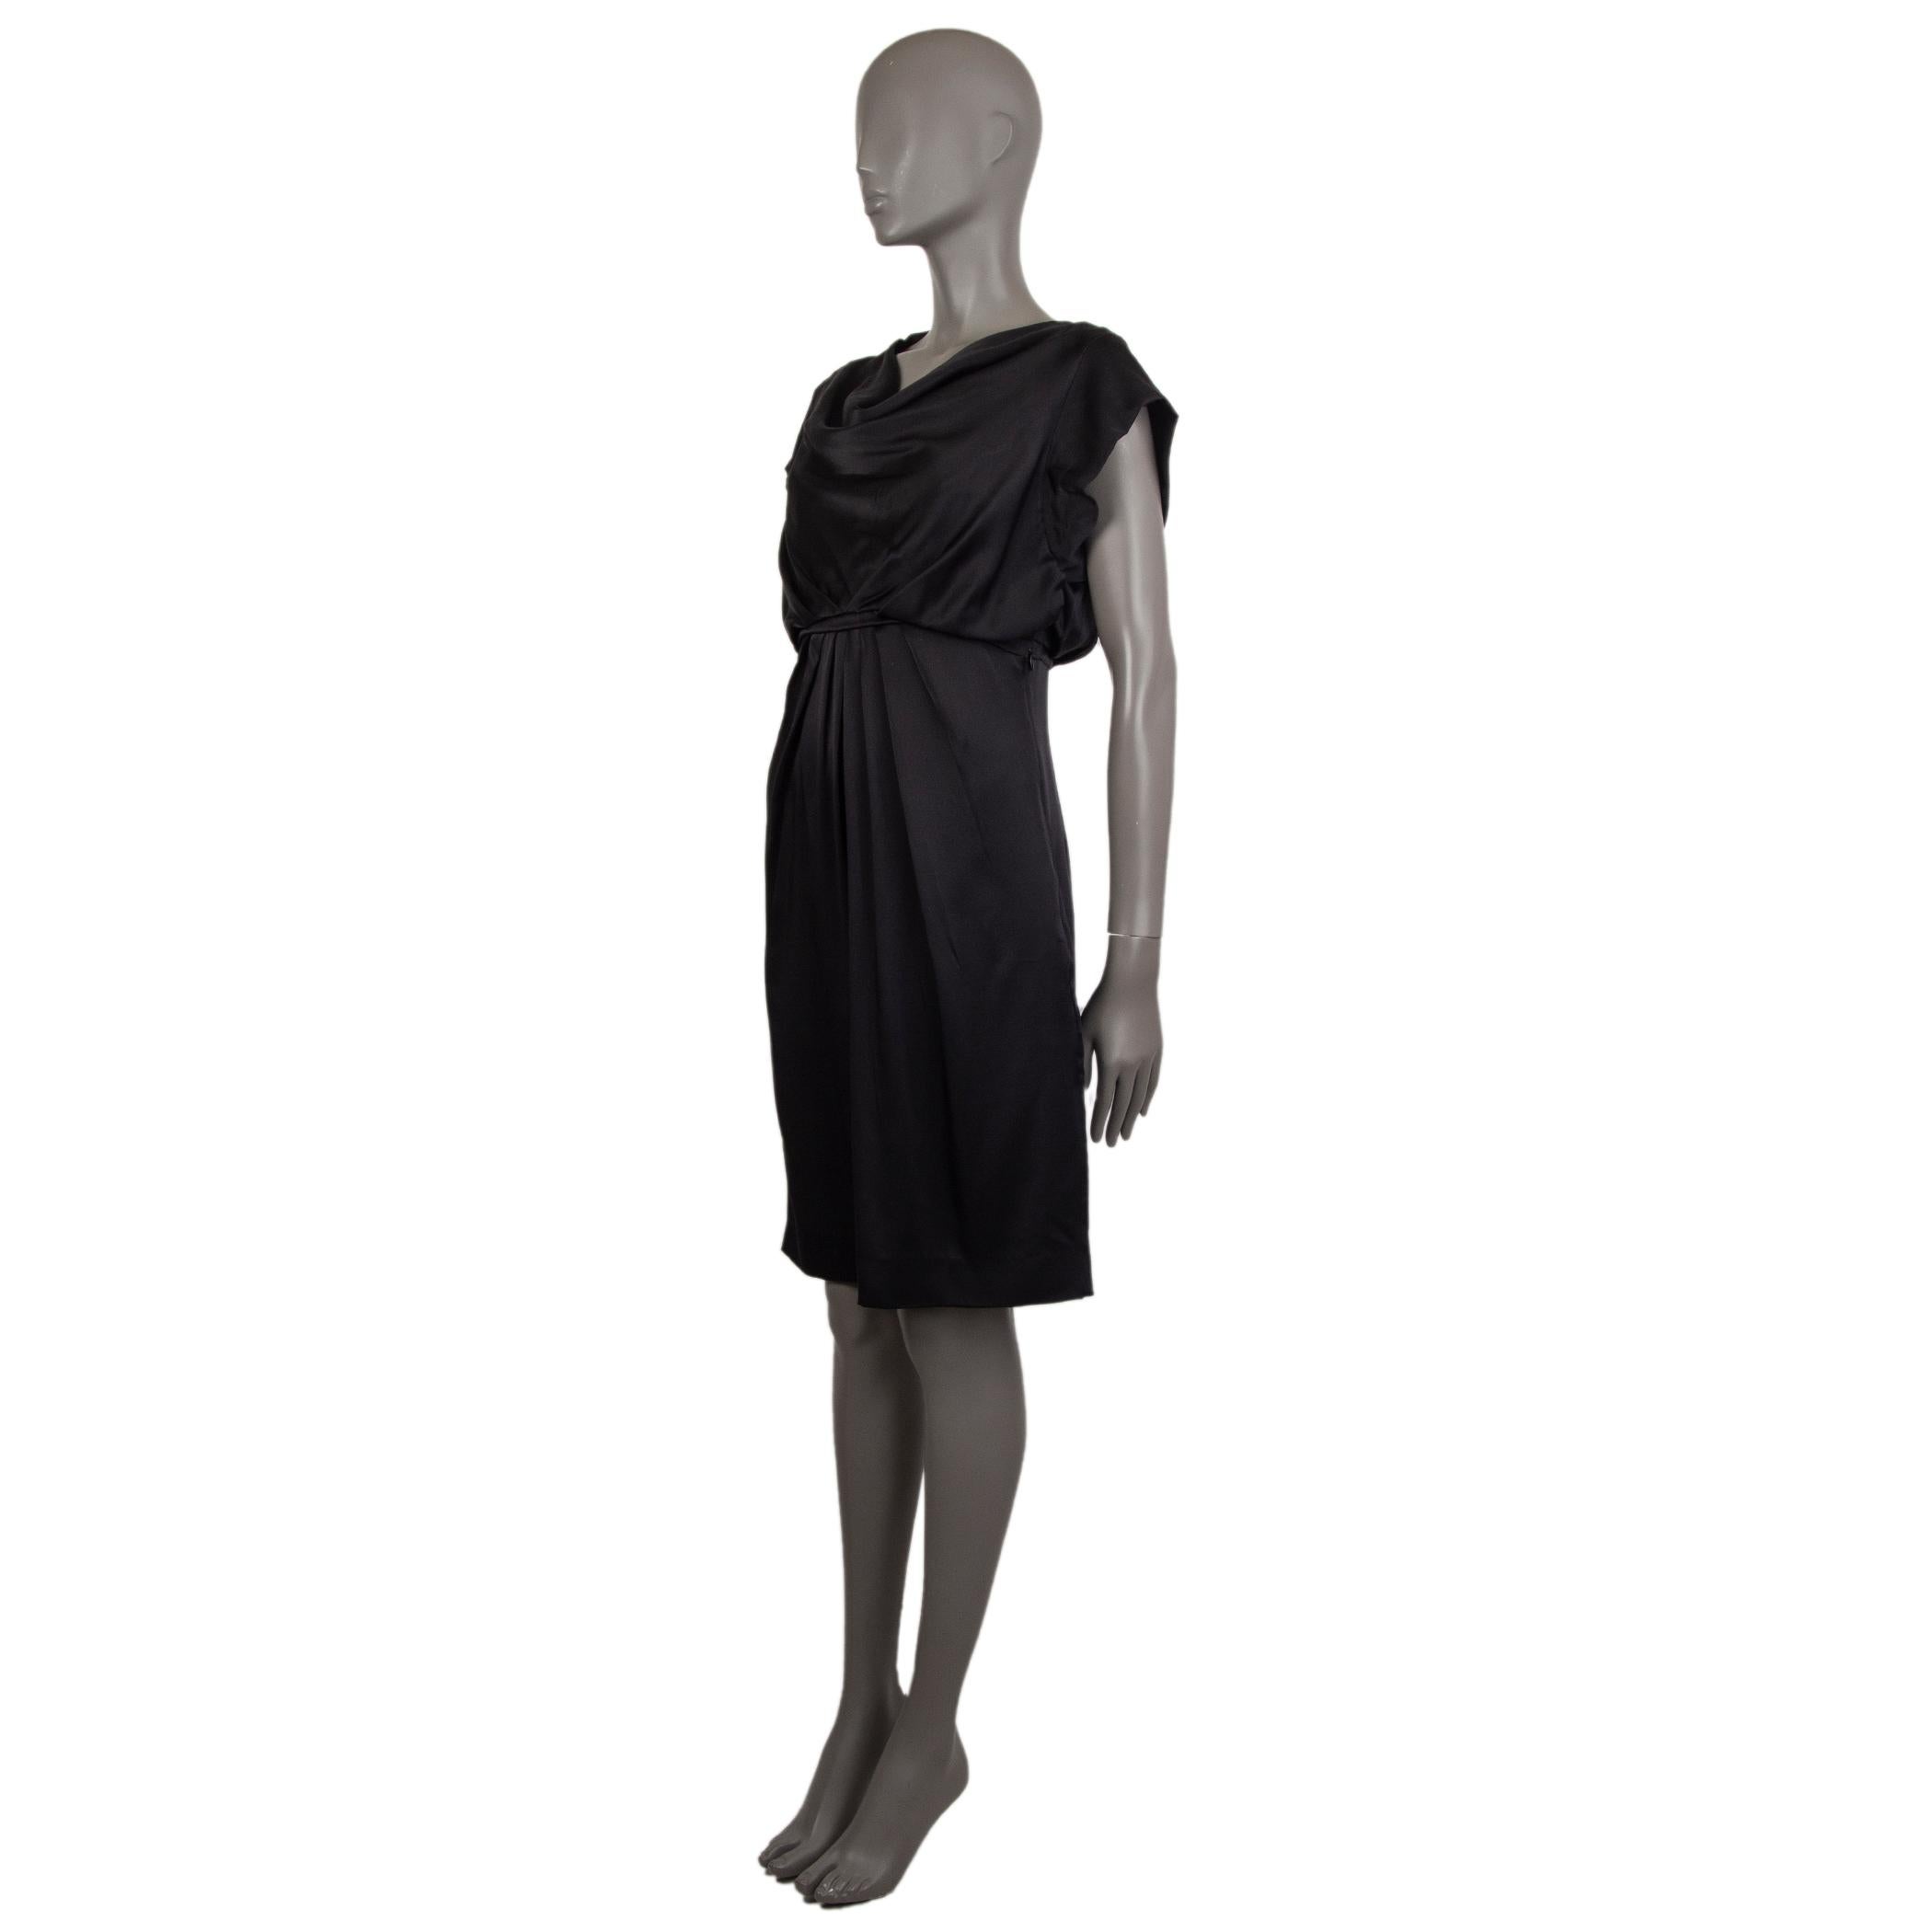 Valentino cap-sleeve satin dress in black nylon (61%) and silk (39%).With cowl neck, pleated waist, and two slit pockets on the sides. Closes with invisible zipper on the side. Unlined. Has been worn and is in excellent condition. 

Tag Size 44
Size